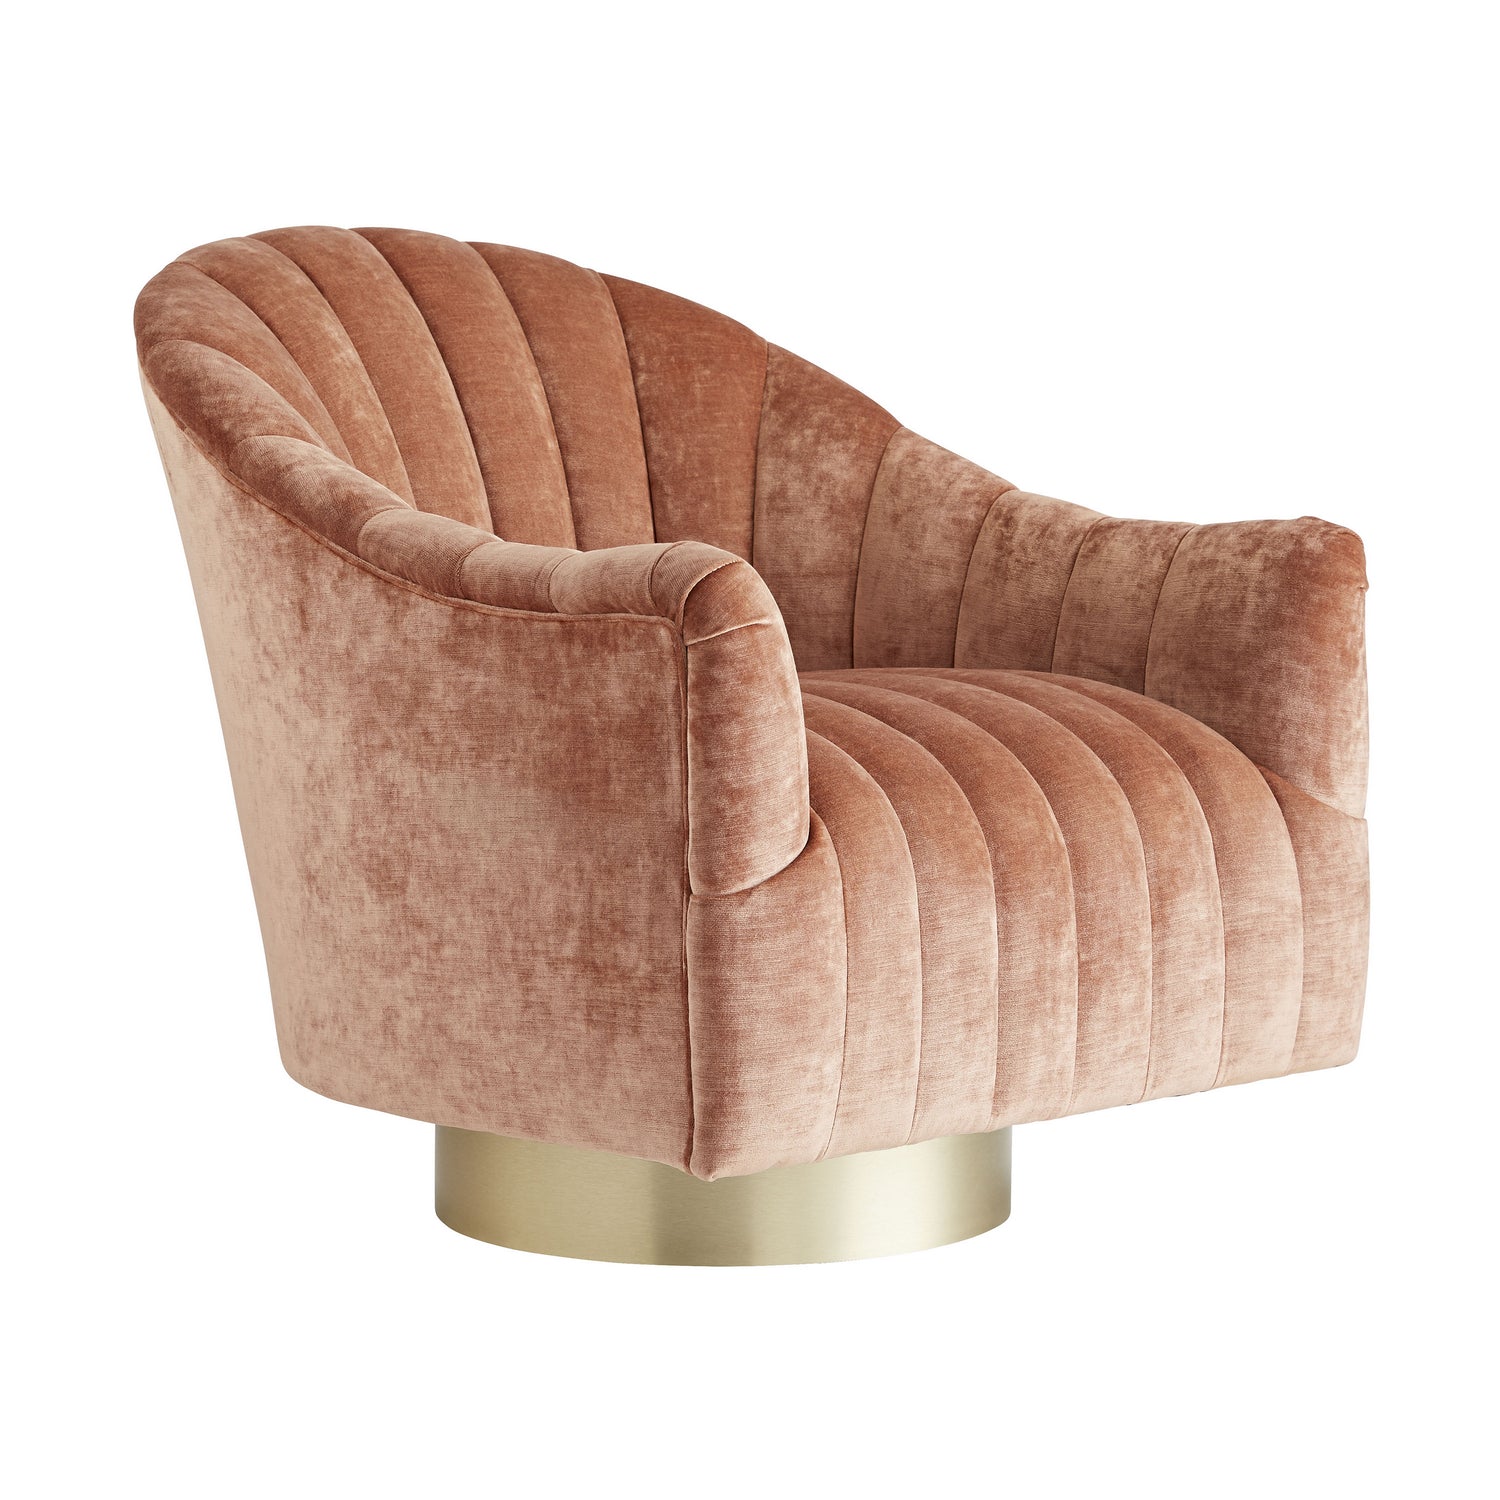 Chair from the Springsteen collection in Dusty Rose finish